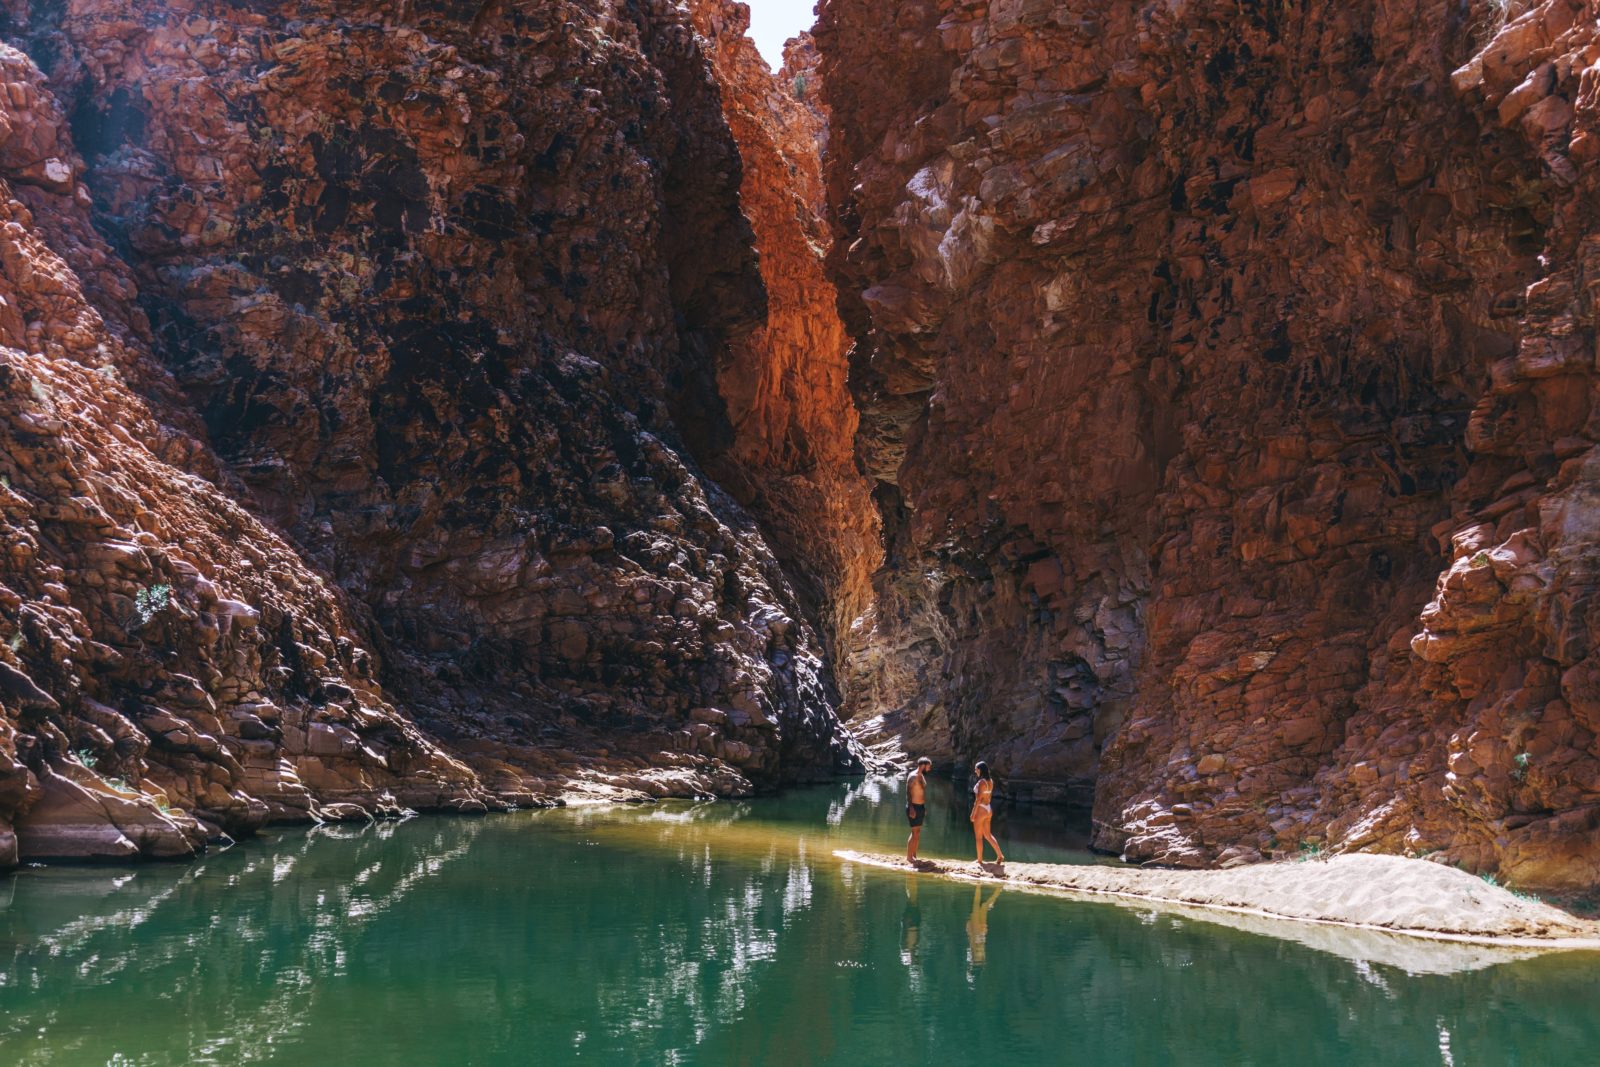 A couple walking on the banks of a waterhole at Redbank Gorge with the gorge in the background